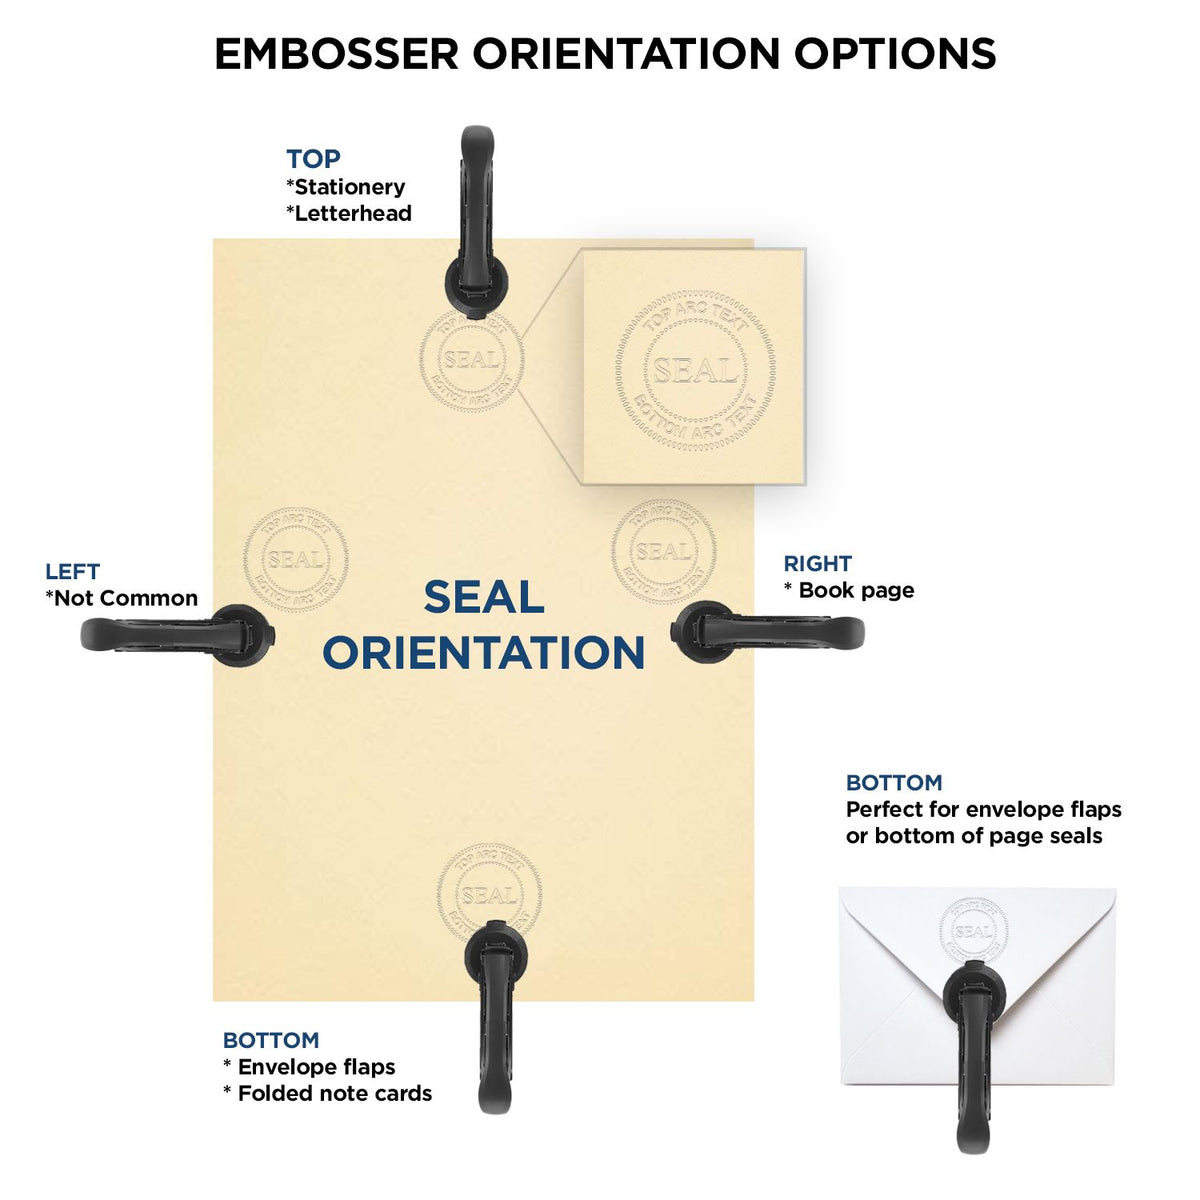 An infographic for the Heavy Duty Cast Iron Delaware Geologist Seal Embosser showing embosser orientation, this is showing examples of a top, bottom, right and left insert.